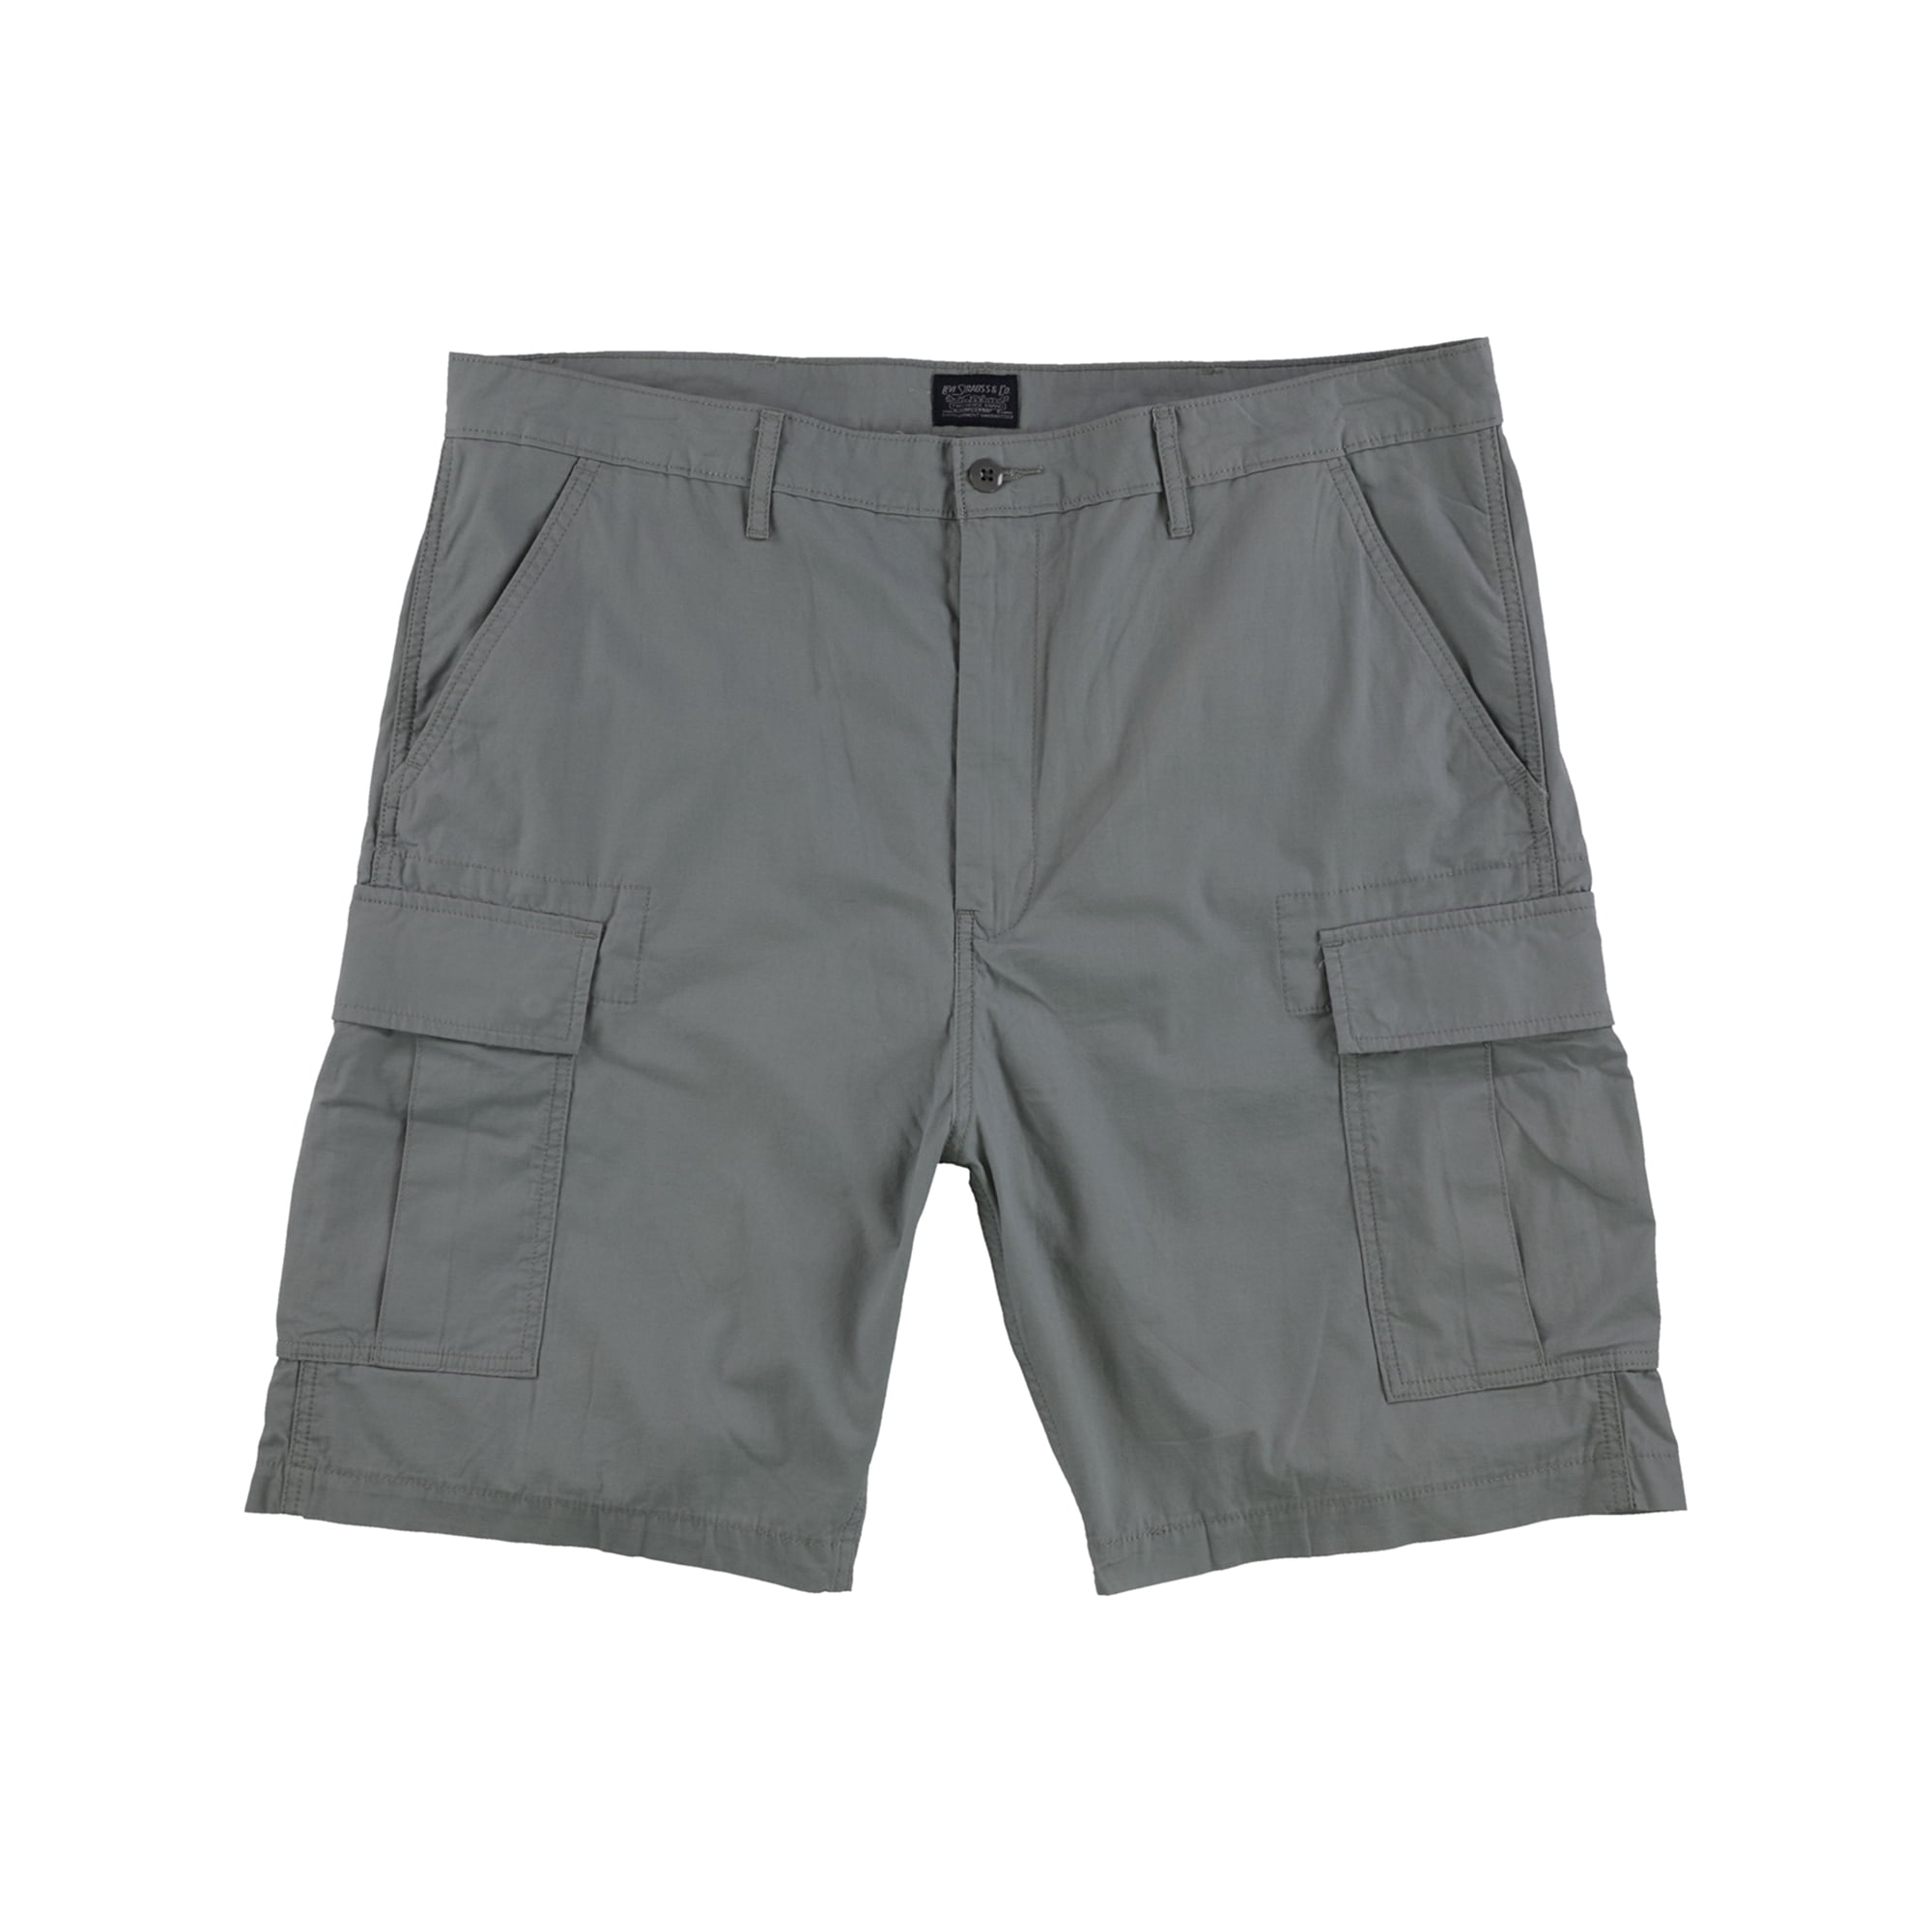 Levi's Mens Carrier Loose Fit Casual Cargo Shorts, Grey, 40 | Walmart Canada